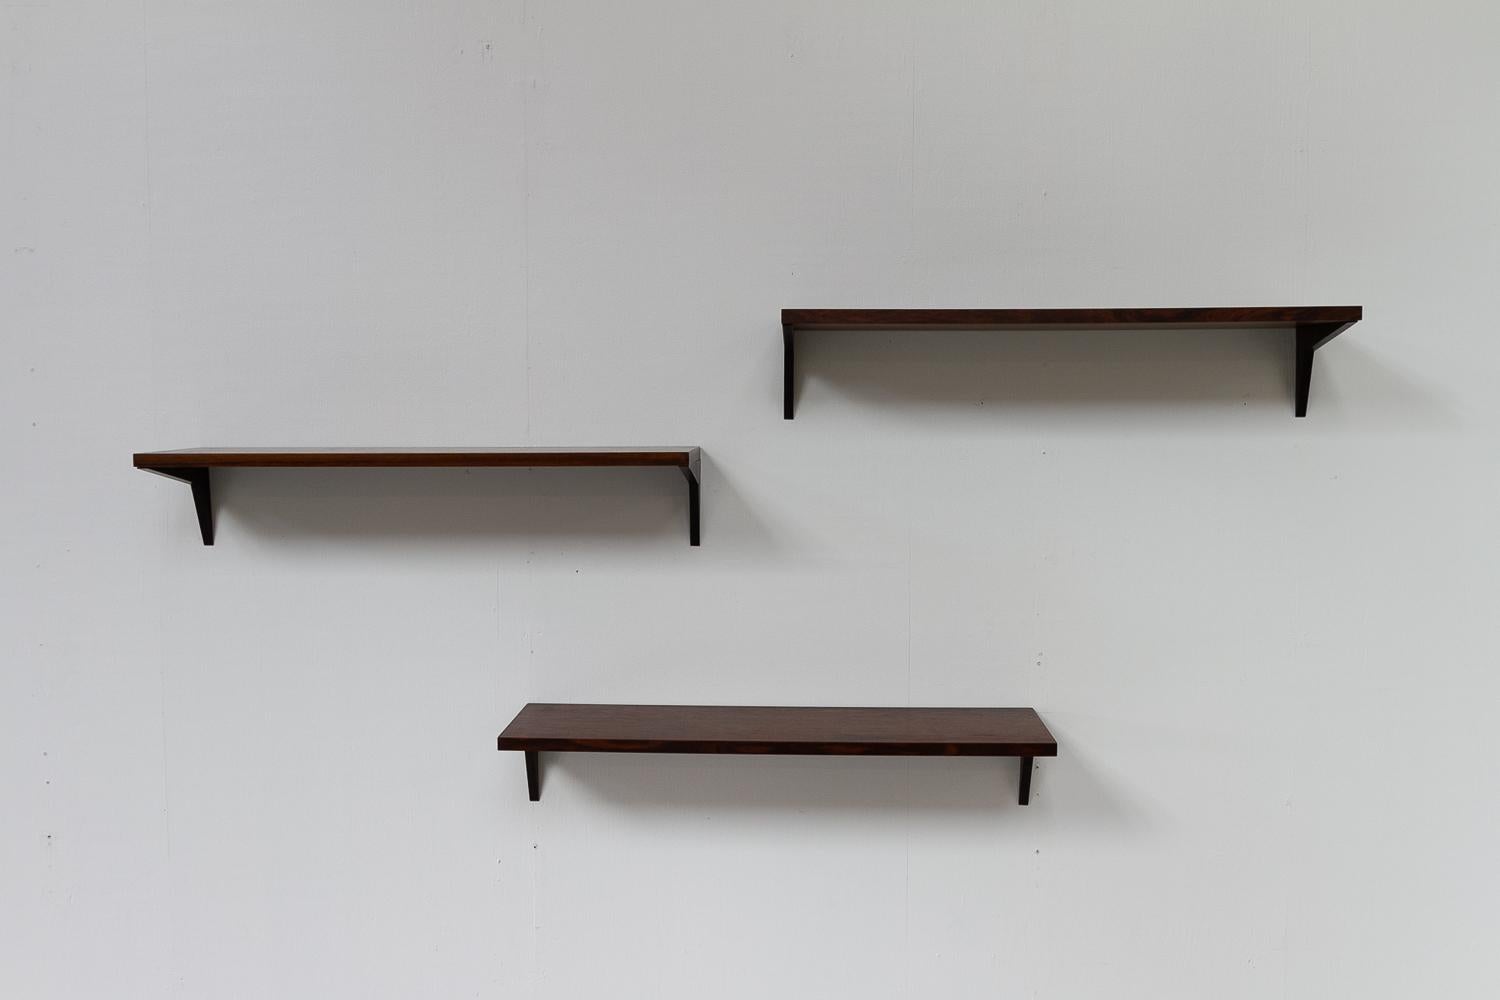 Danish Modern Rosewood Shelves by Poul Cadovius for Cado, 1960s. Set of 3.
Three floating shelves in beautiful grained rosewood/palisander veneer designed by Poul Cadovius for Cado in the 1960s. Originally for for wooden uptights, but here